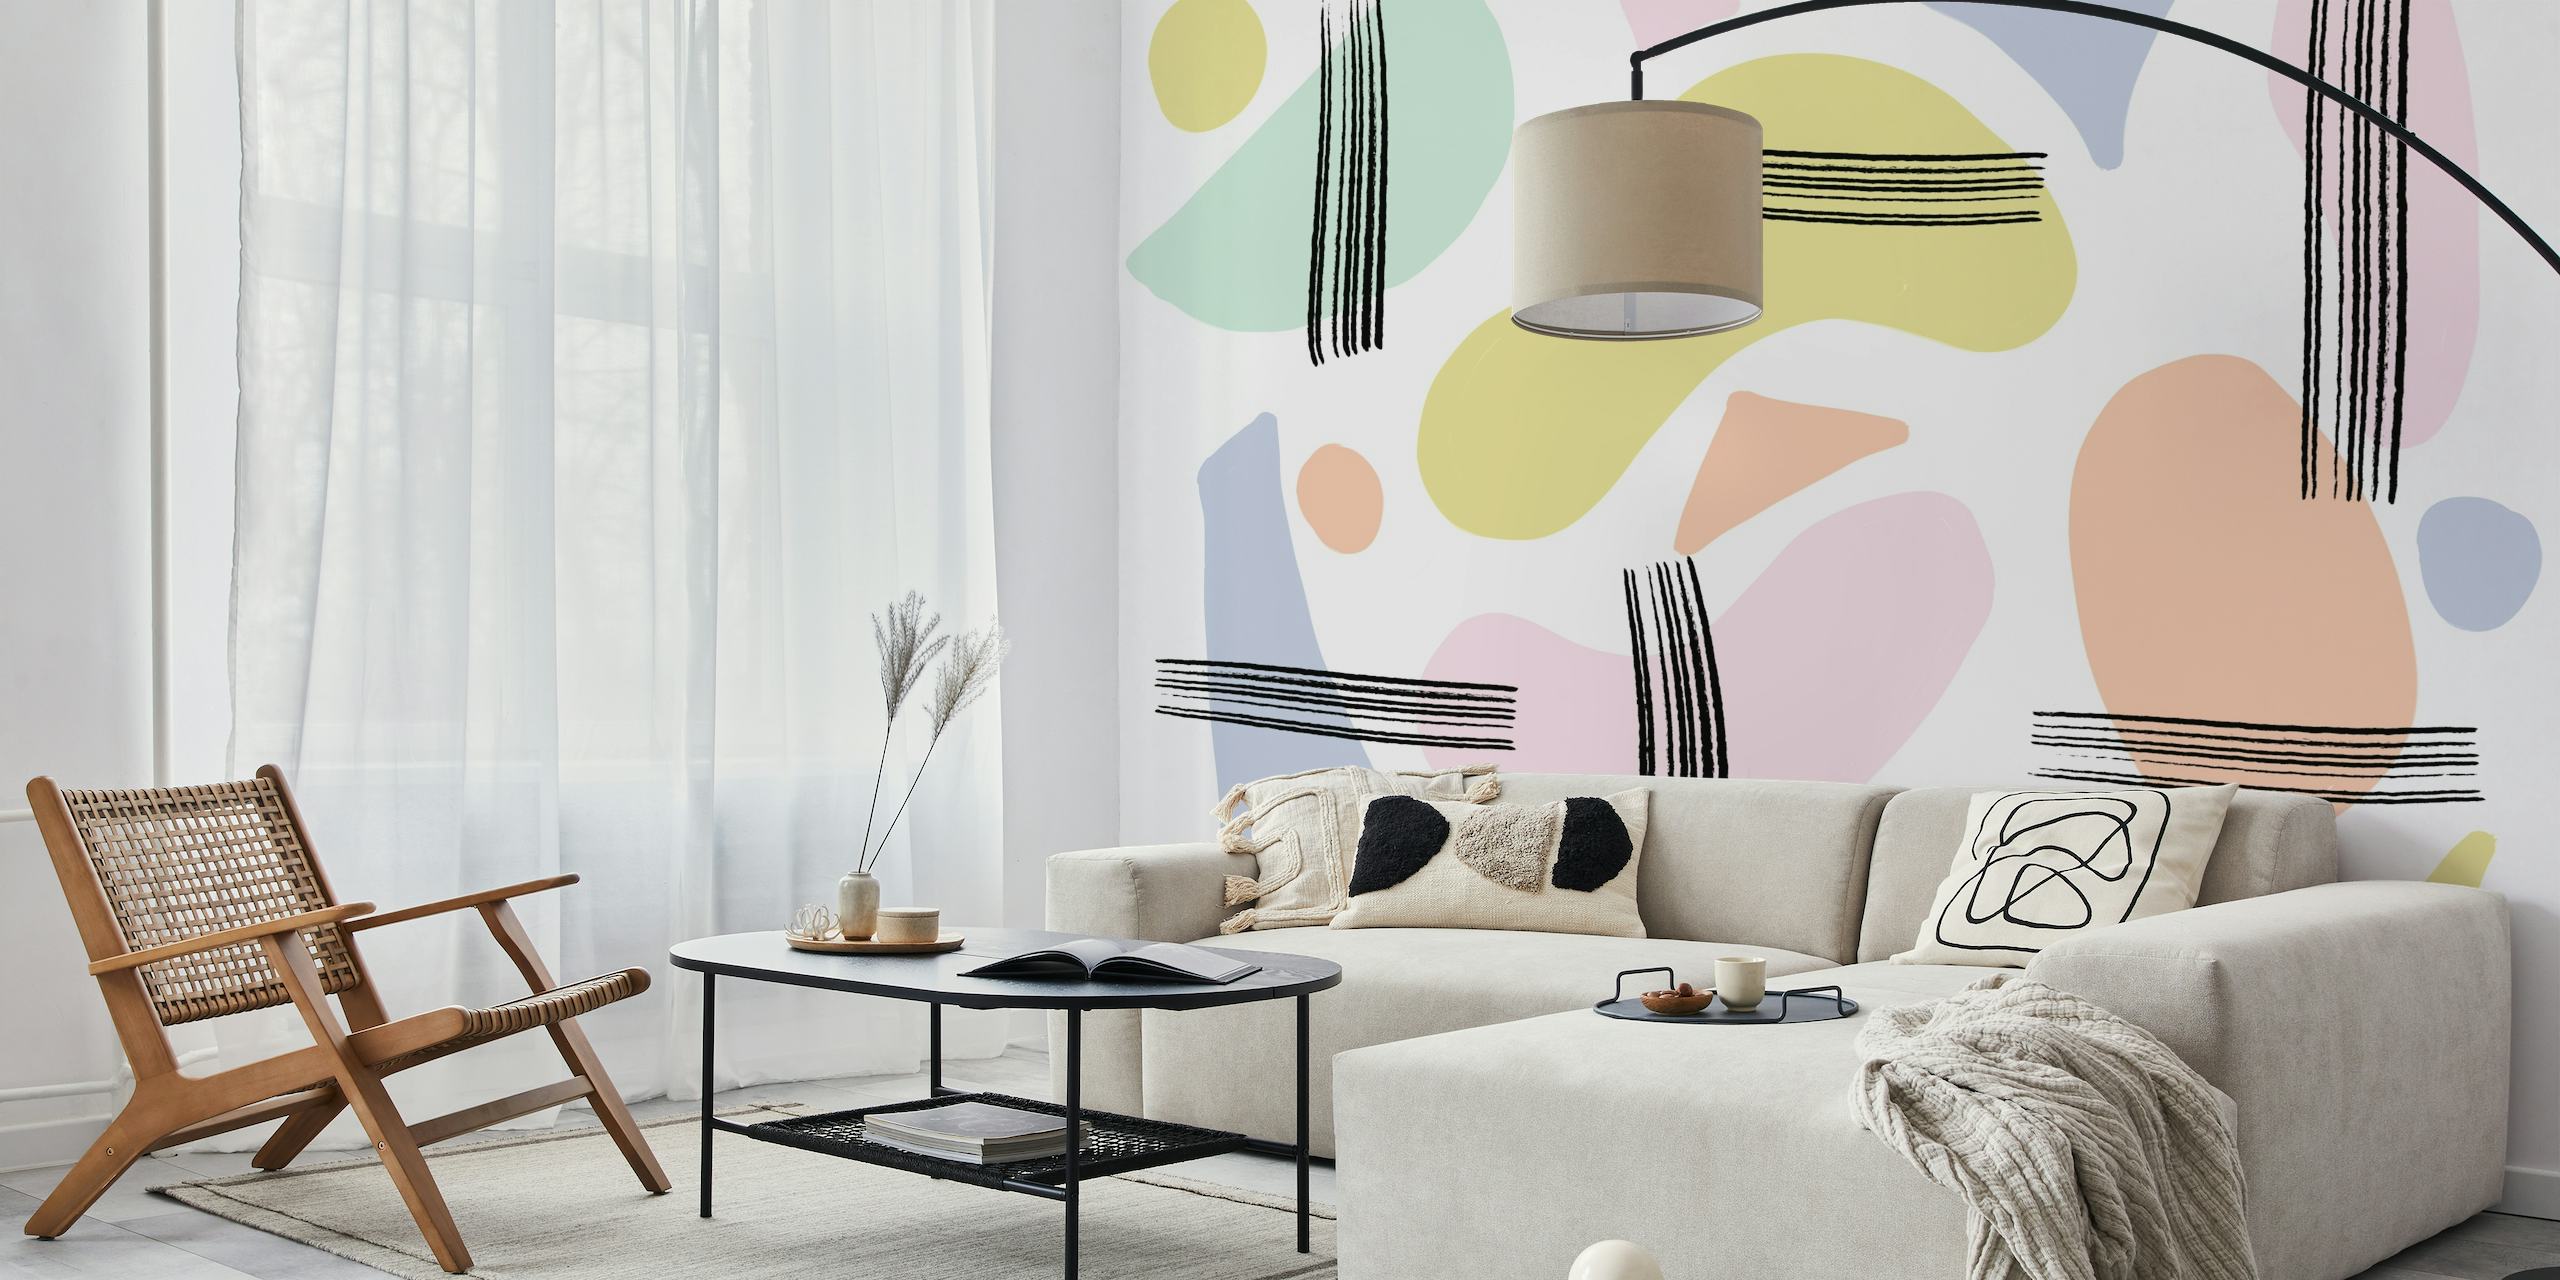 Illustrative pastel-colored abstract shapes and lines on wall mural